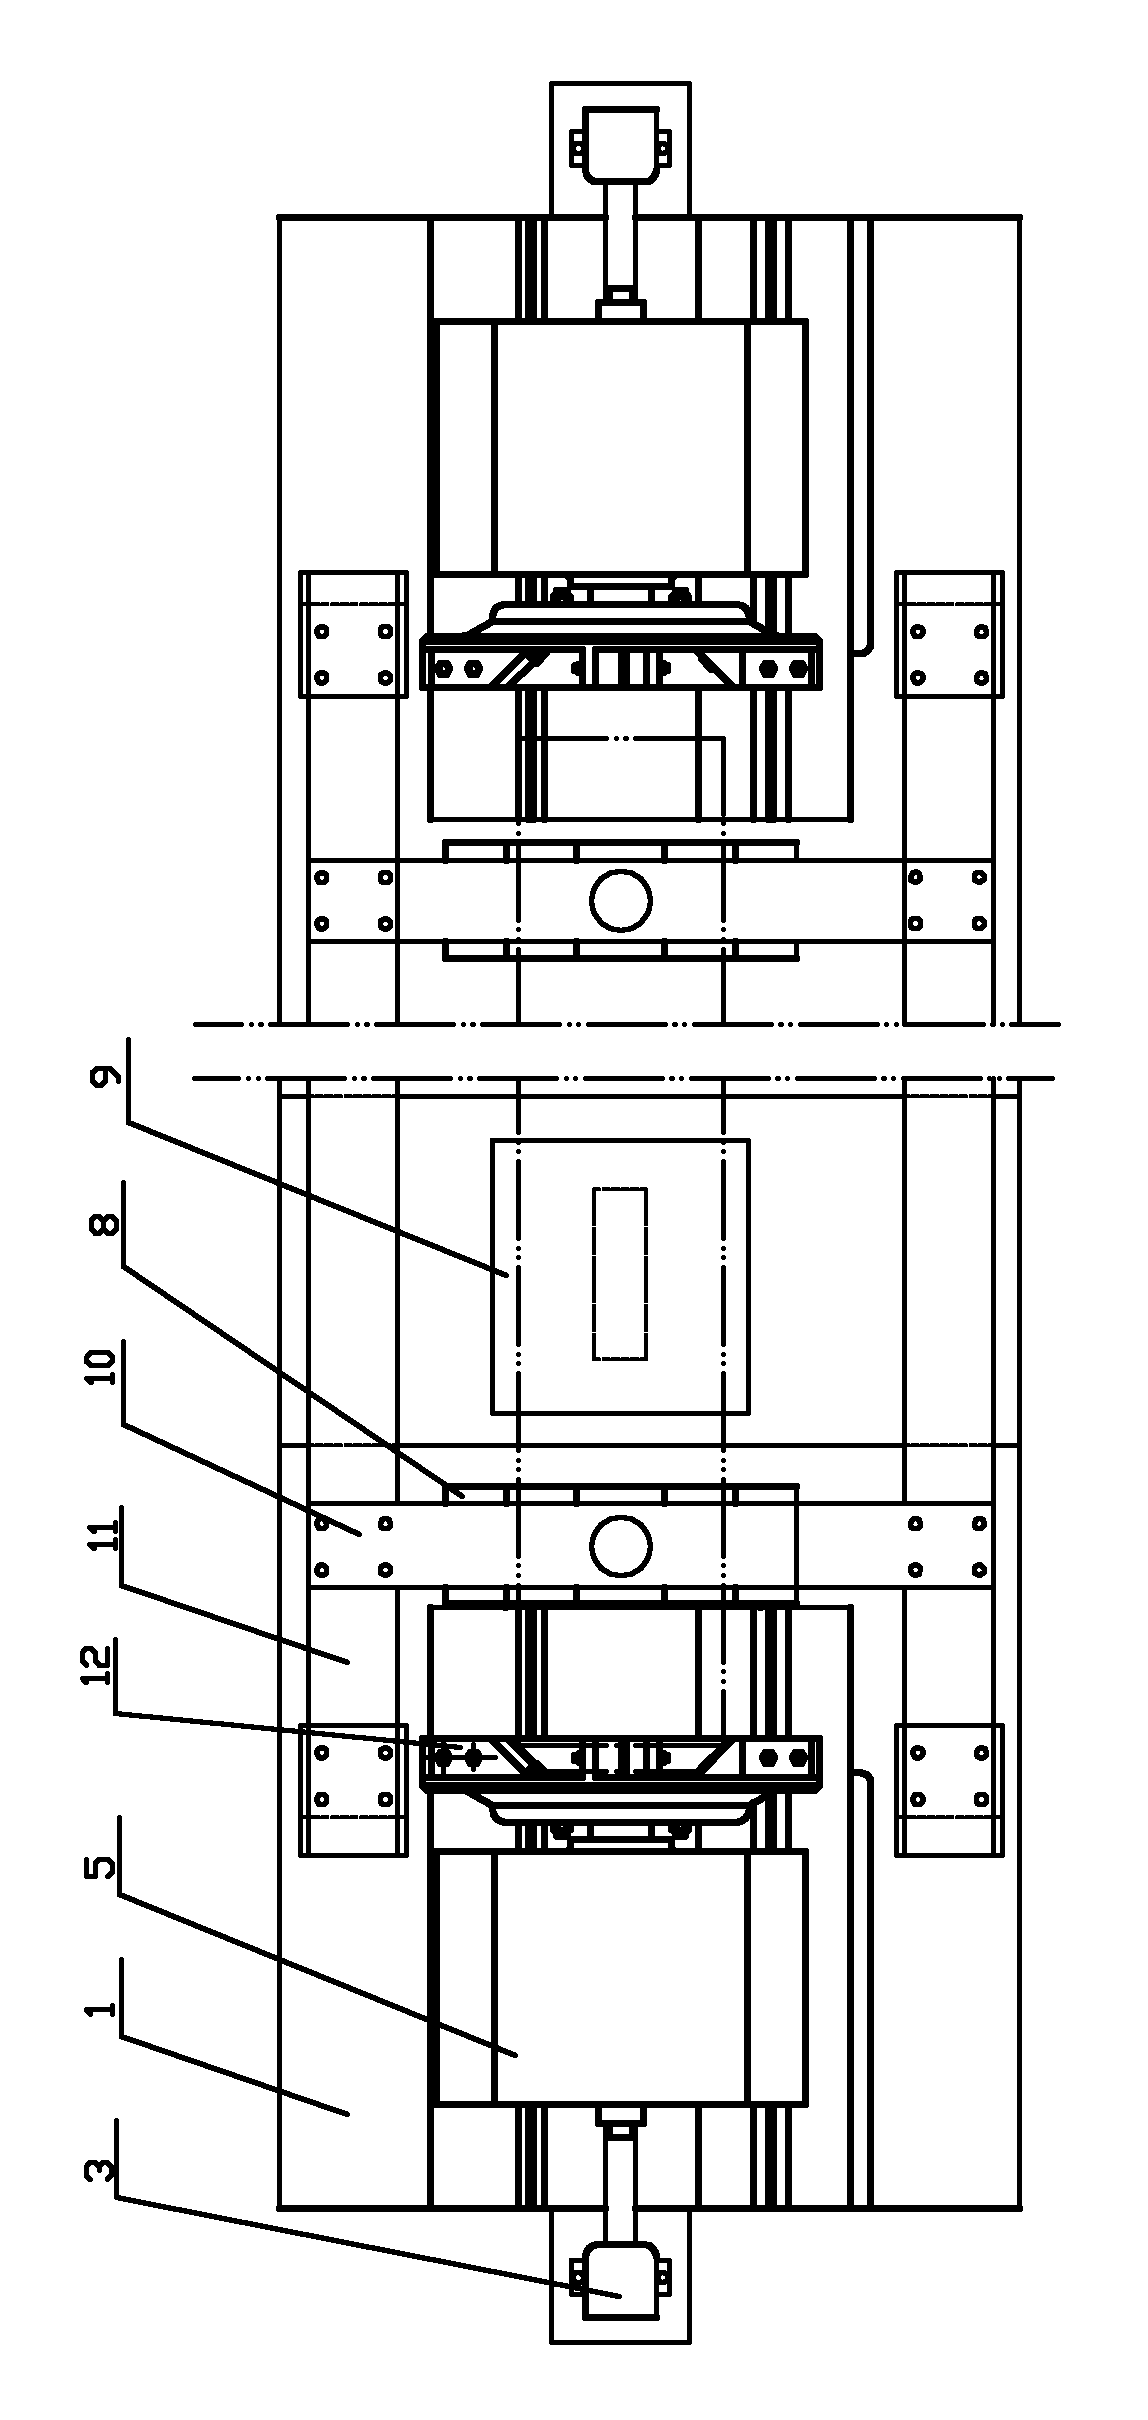 Whirlwind milling machine for chamfering of large bar